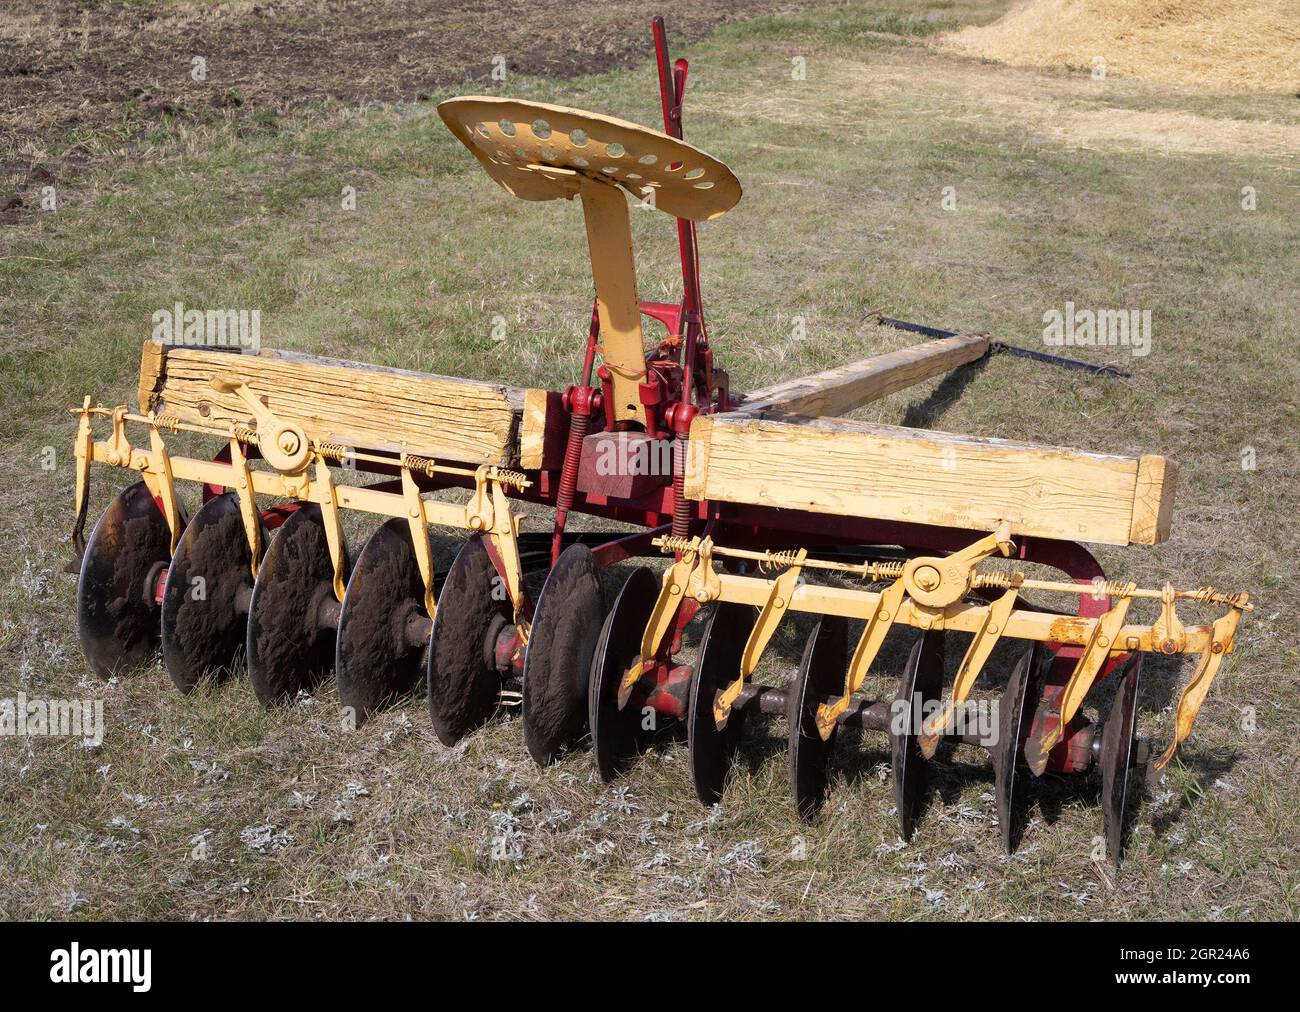 Old disc harrow or discer, an antique piece of farm equipment used to till soil in rural Alberta, Canada Stock Photo